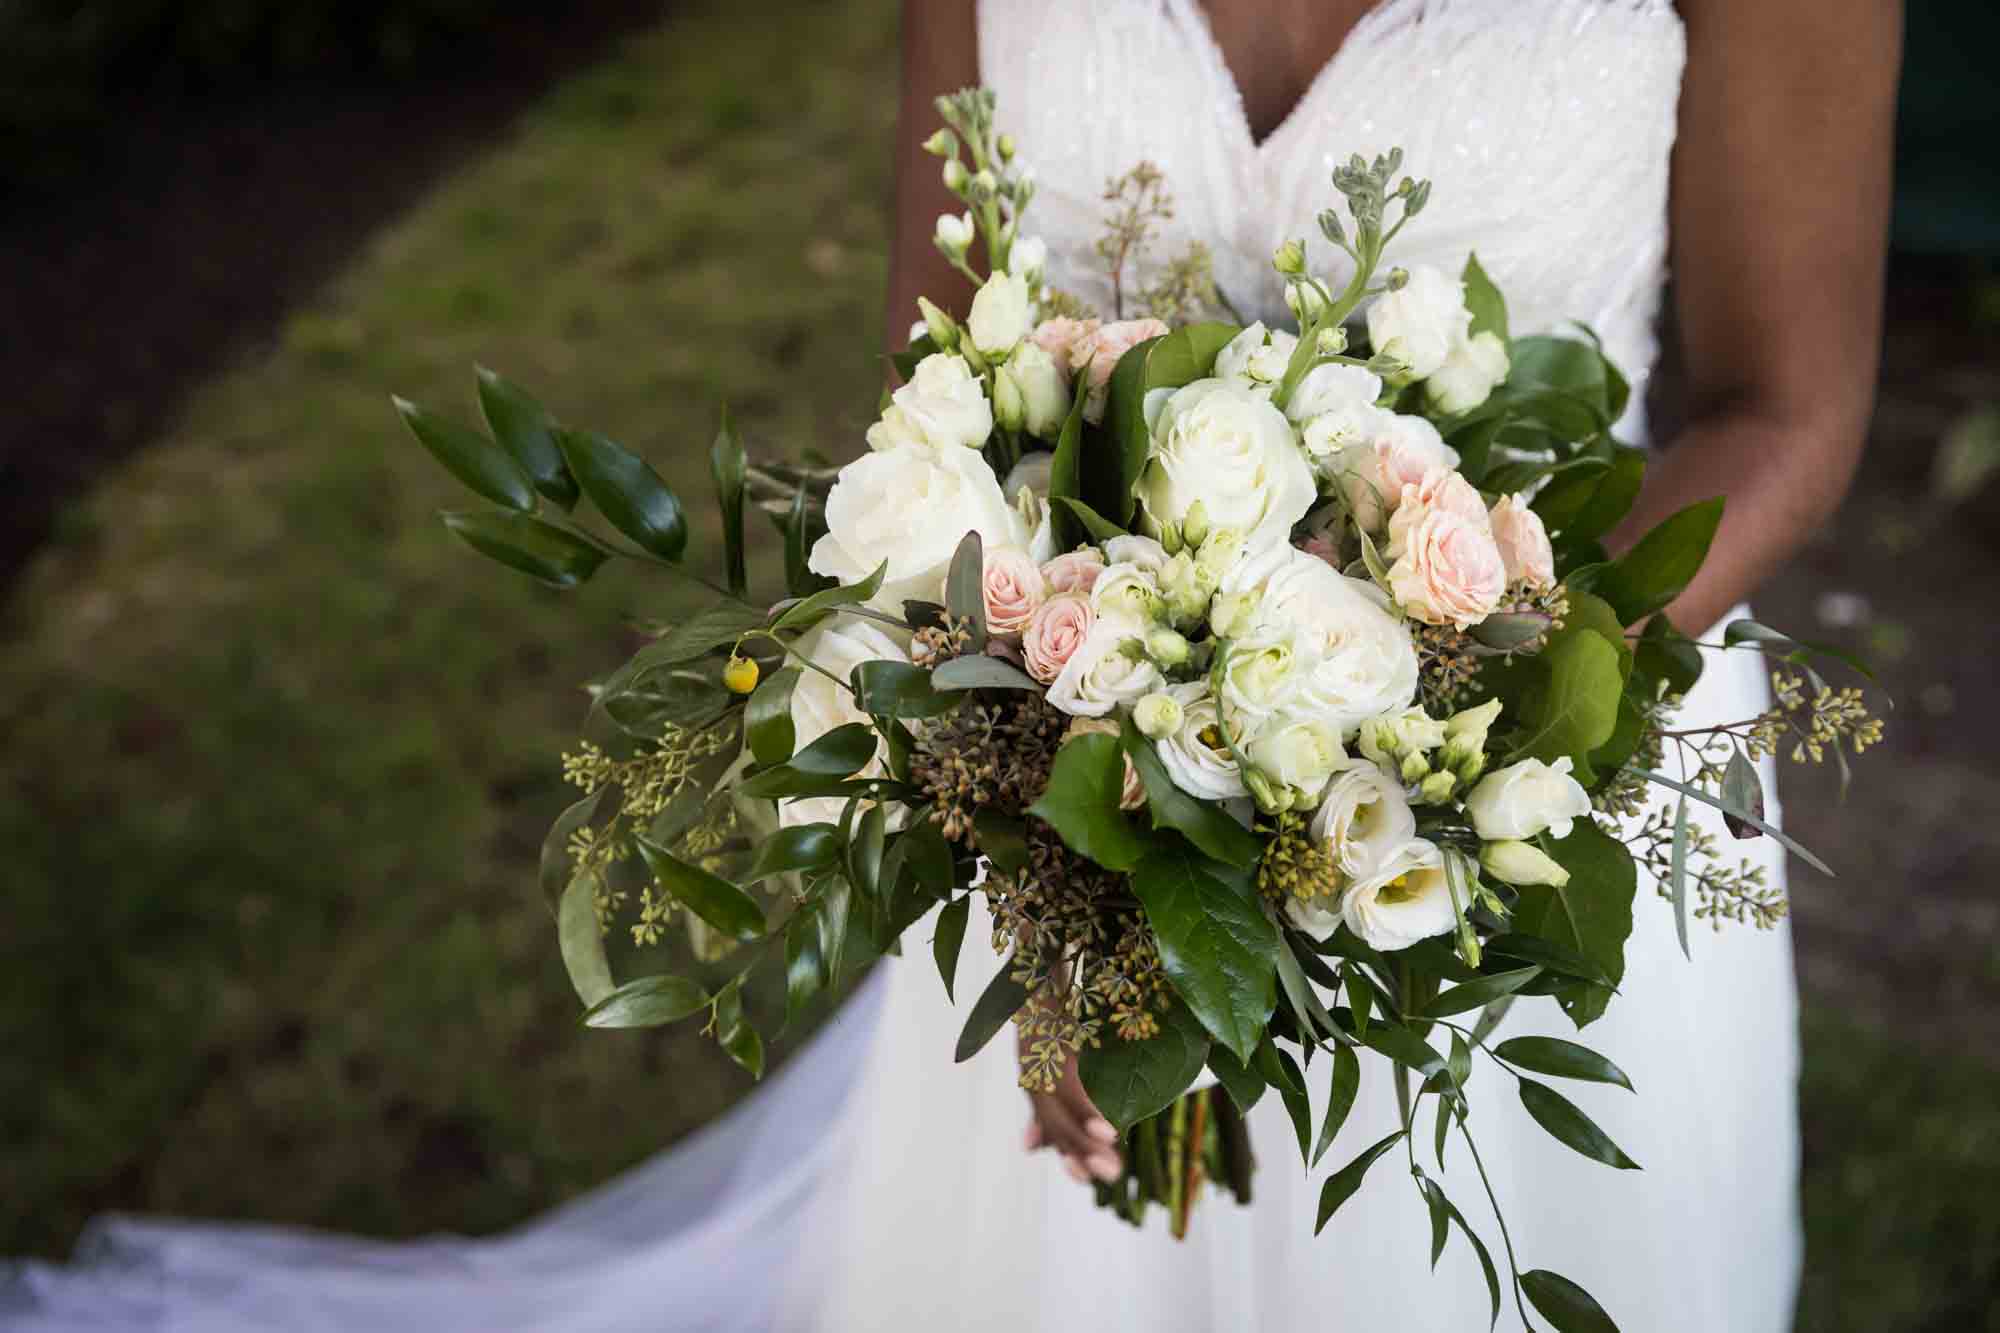 Close up of bride carrying a large white flower bouquet for article on wedding bouquet photo tips